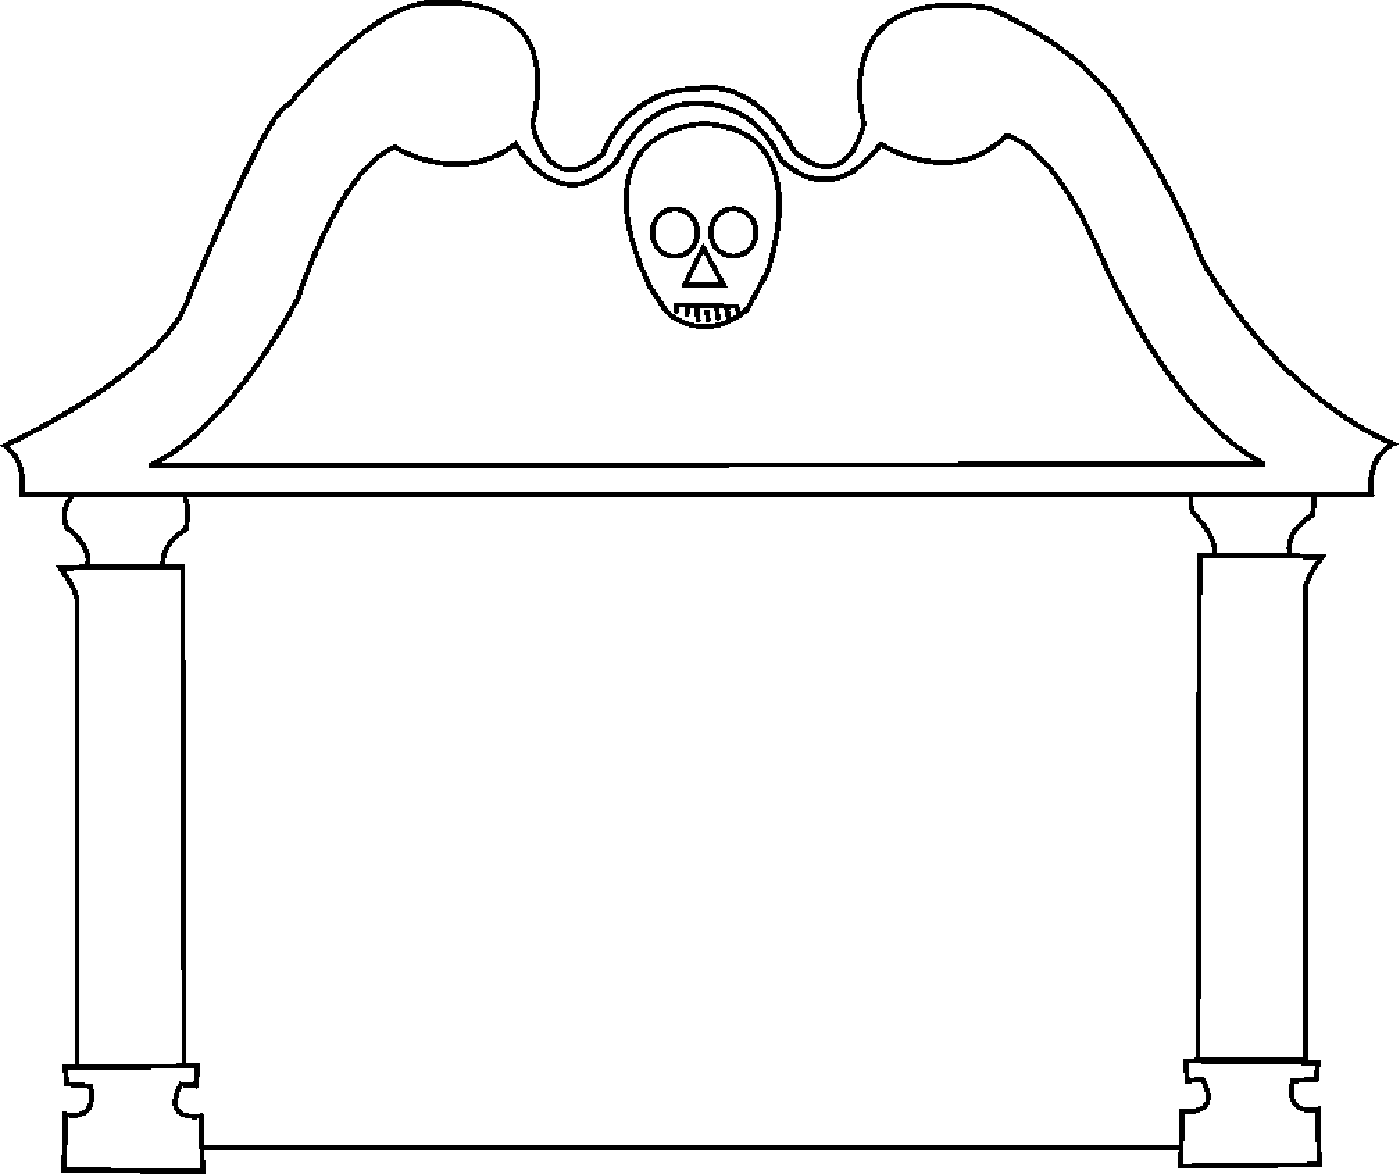 Free tombstone template.